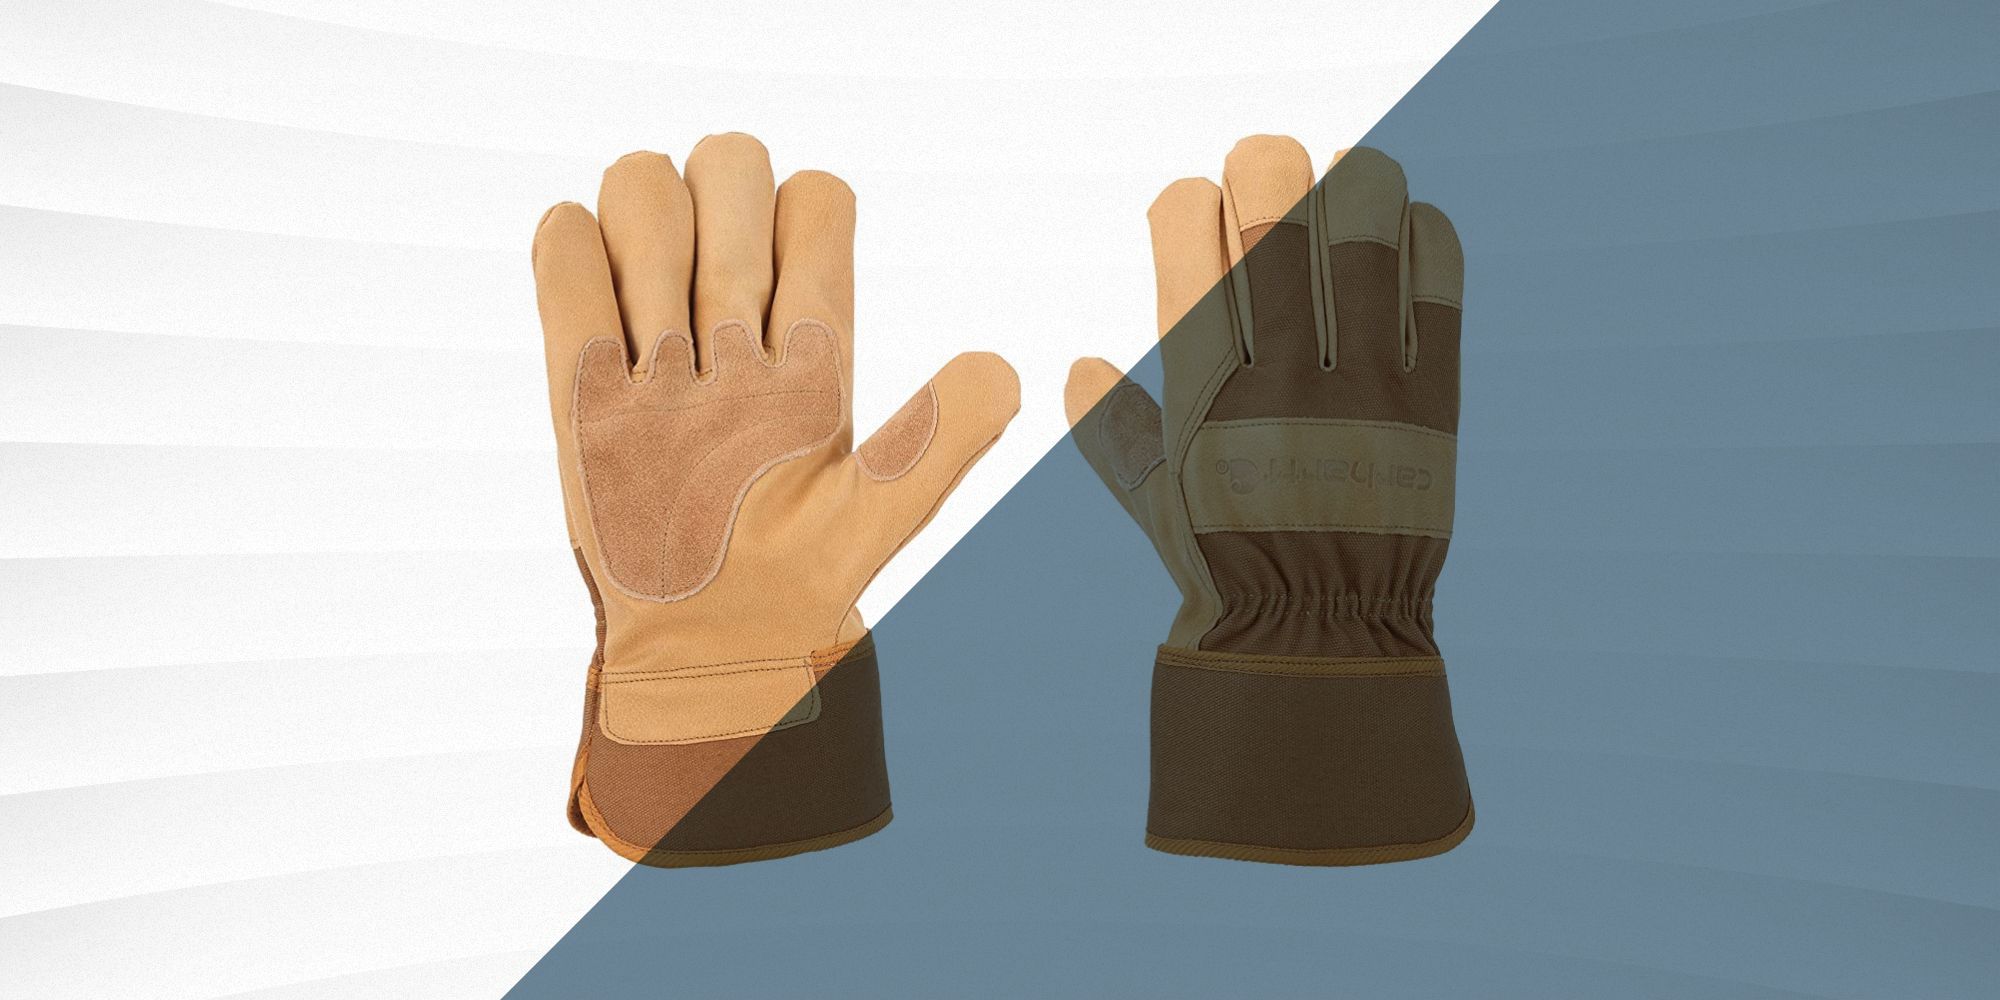 Pair of Latex Coated Durable Safety Work Gloves Gardening Builders Mechanic Grip 